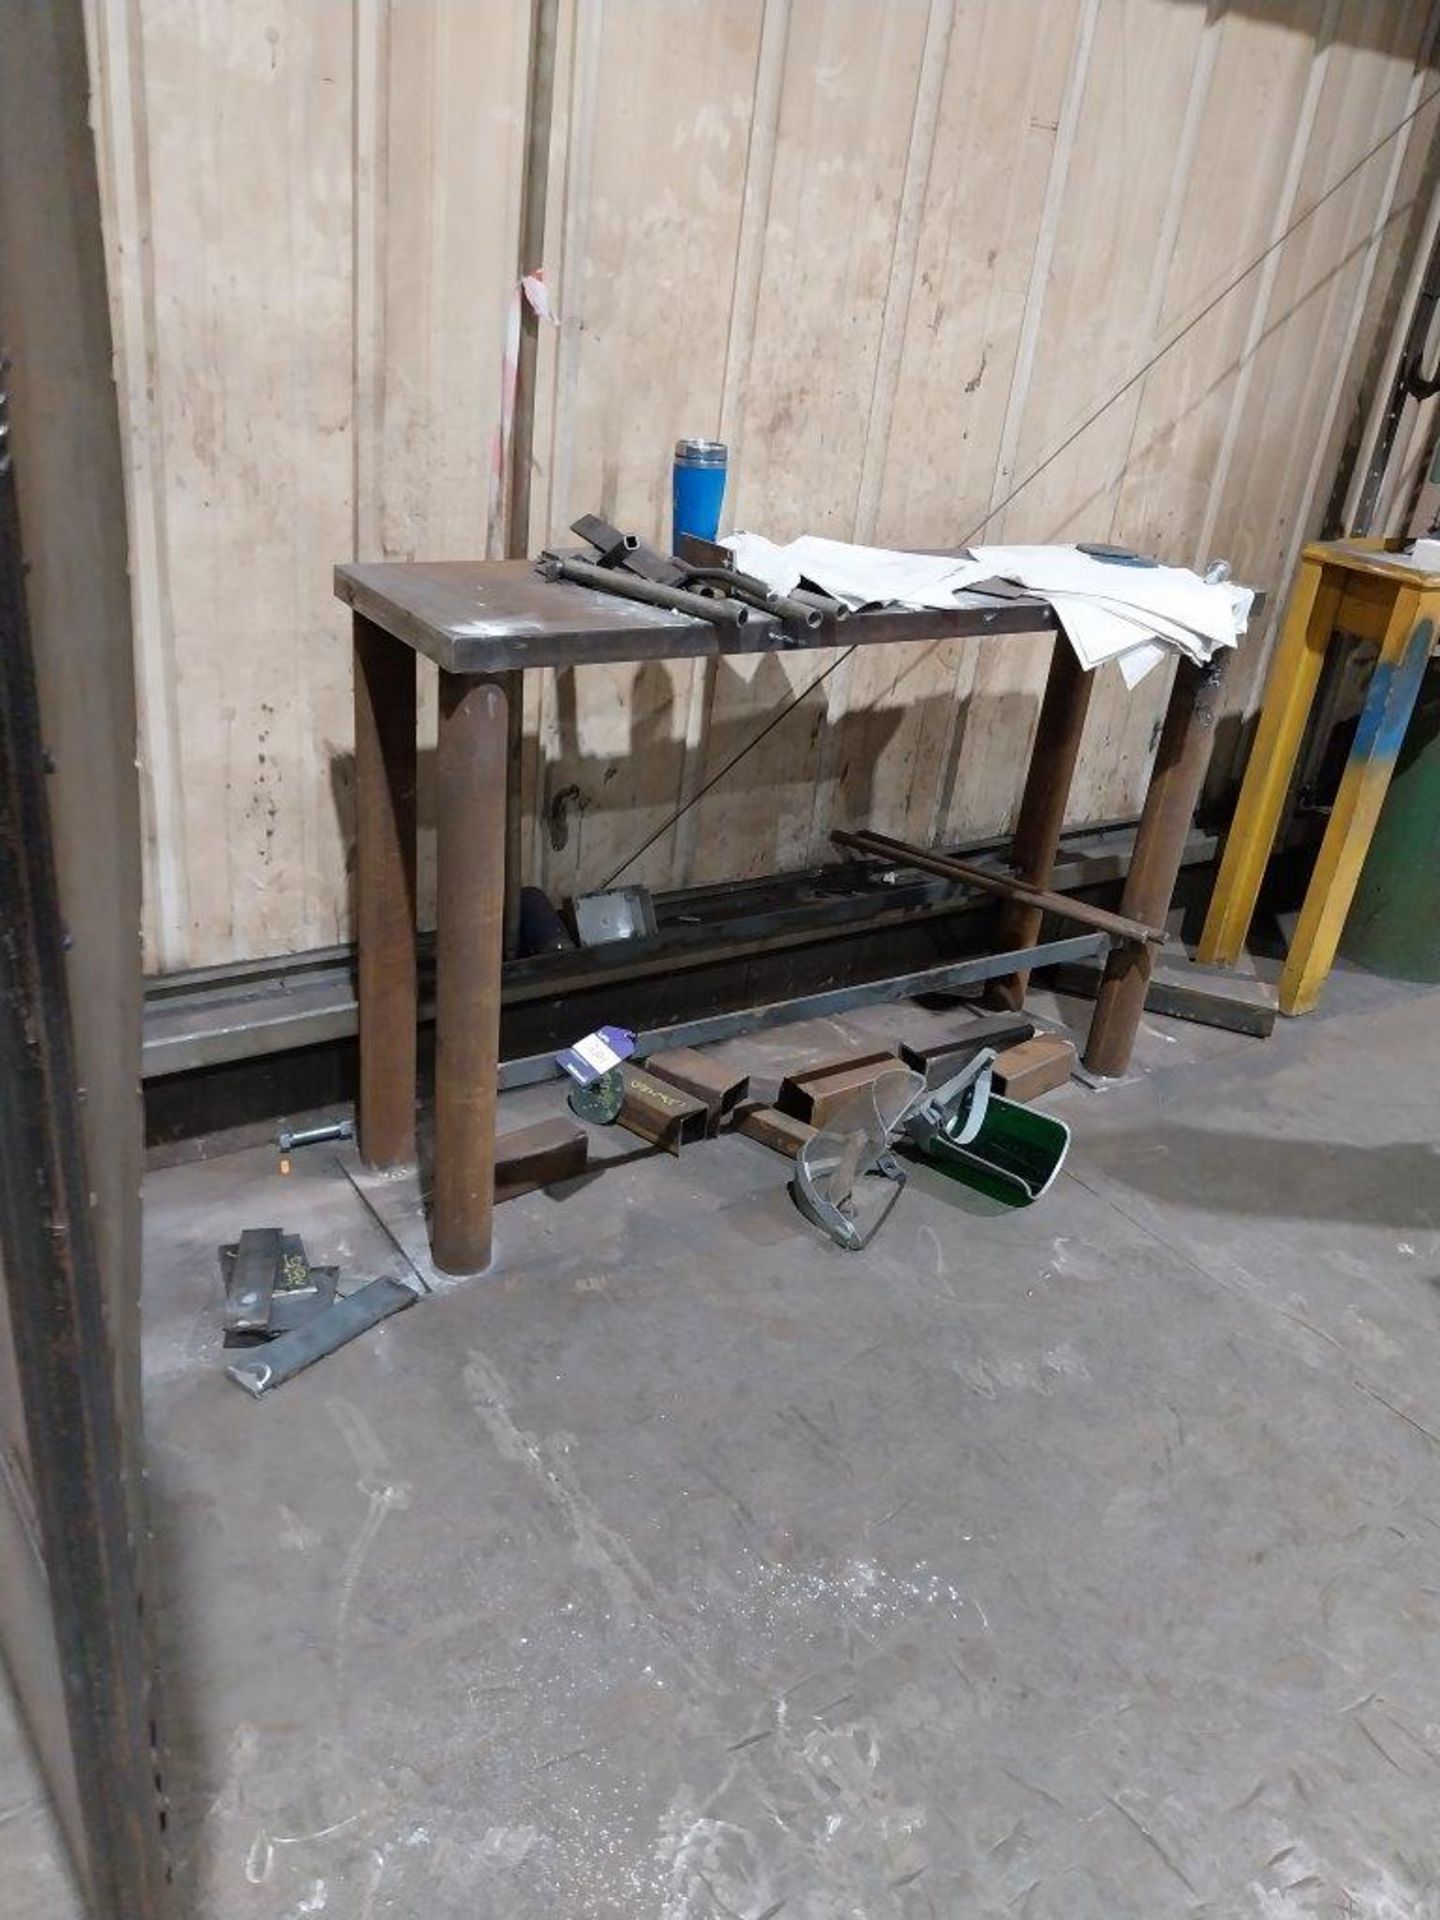 2 Inhouse manufactured steel work benches - Image 2 of 2